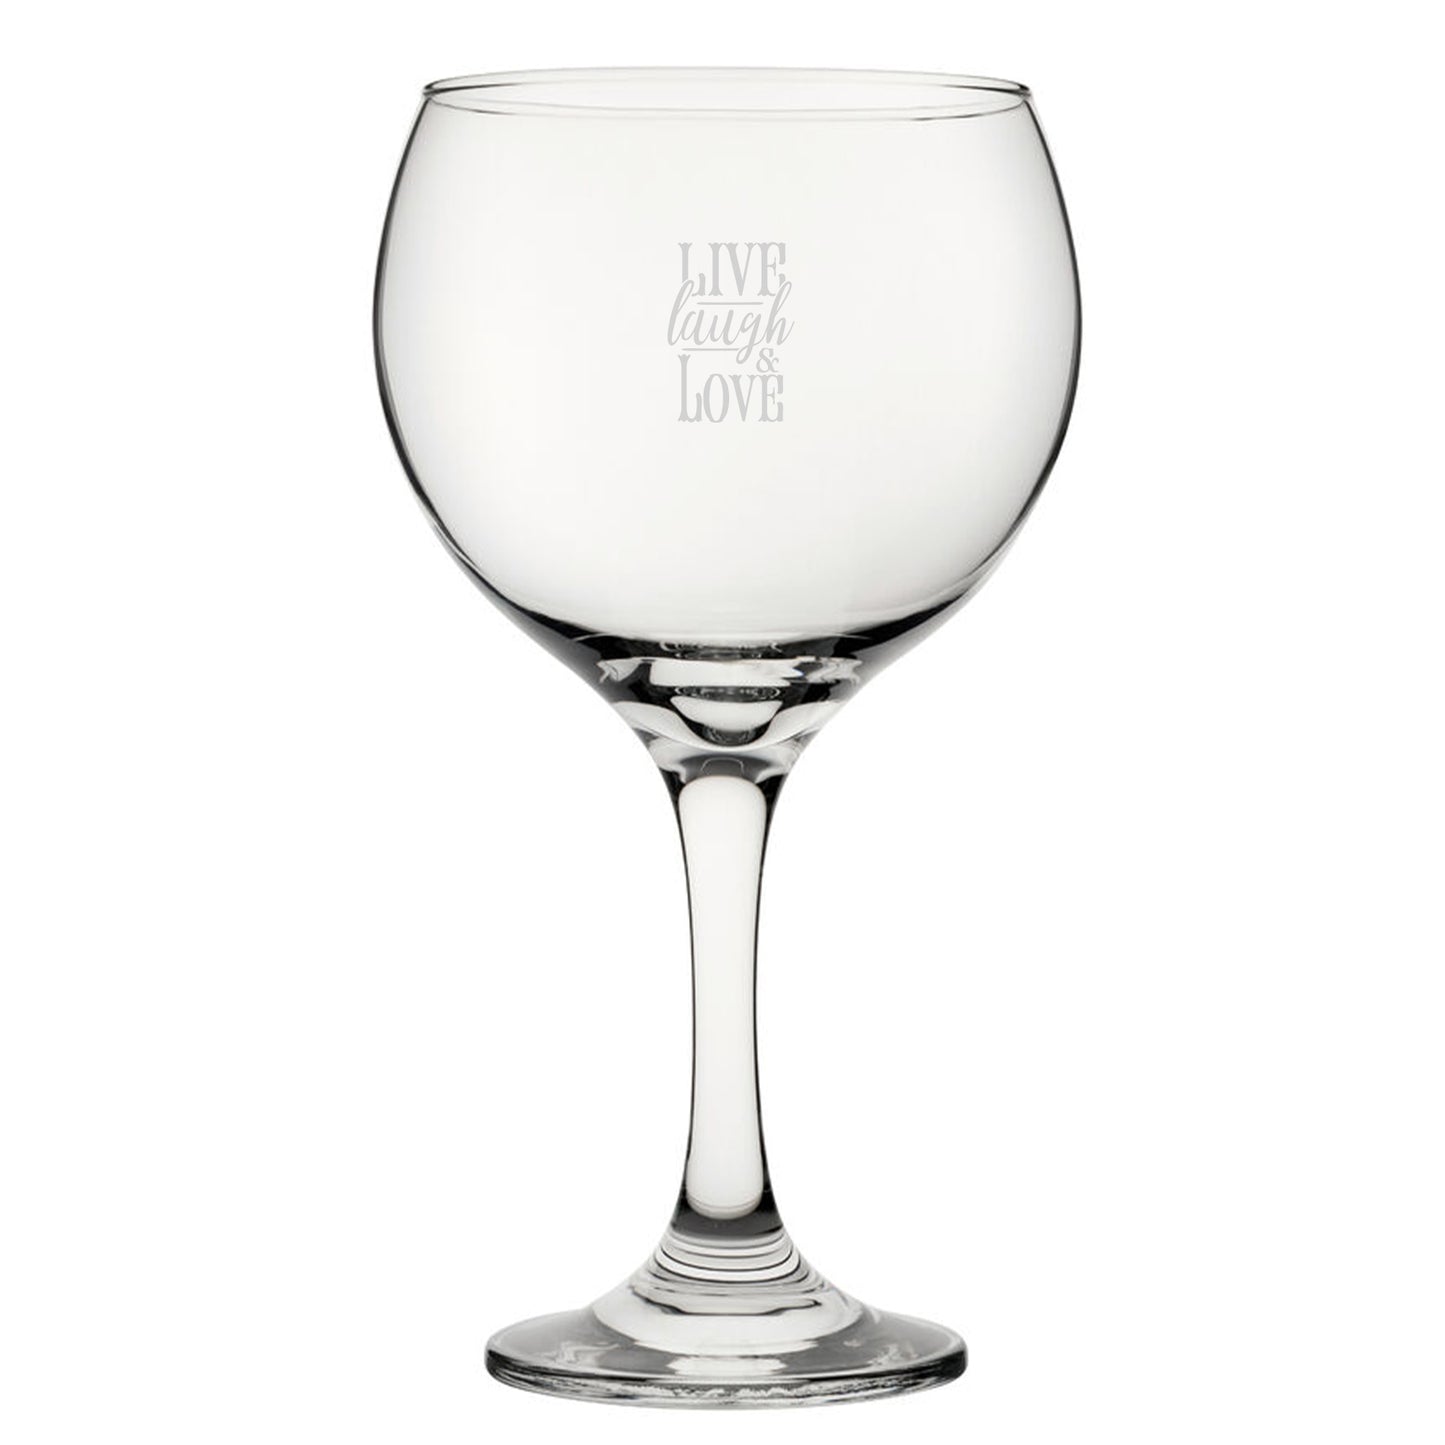 Live Laugh Love - Engraved Novelty Gin Balloon Cocktail Glass Image 2